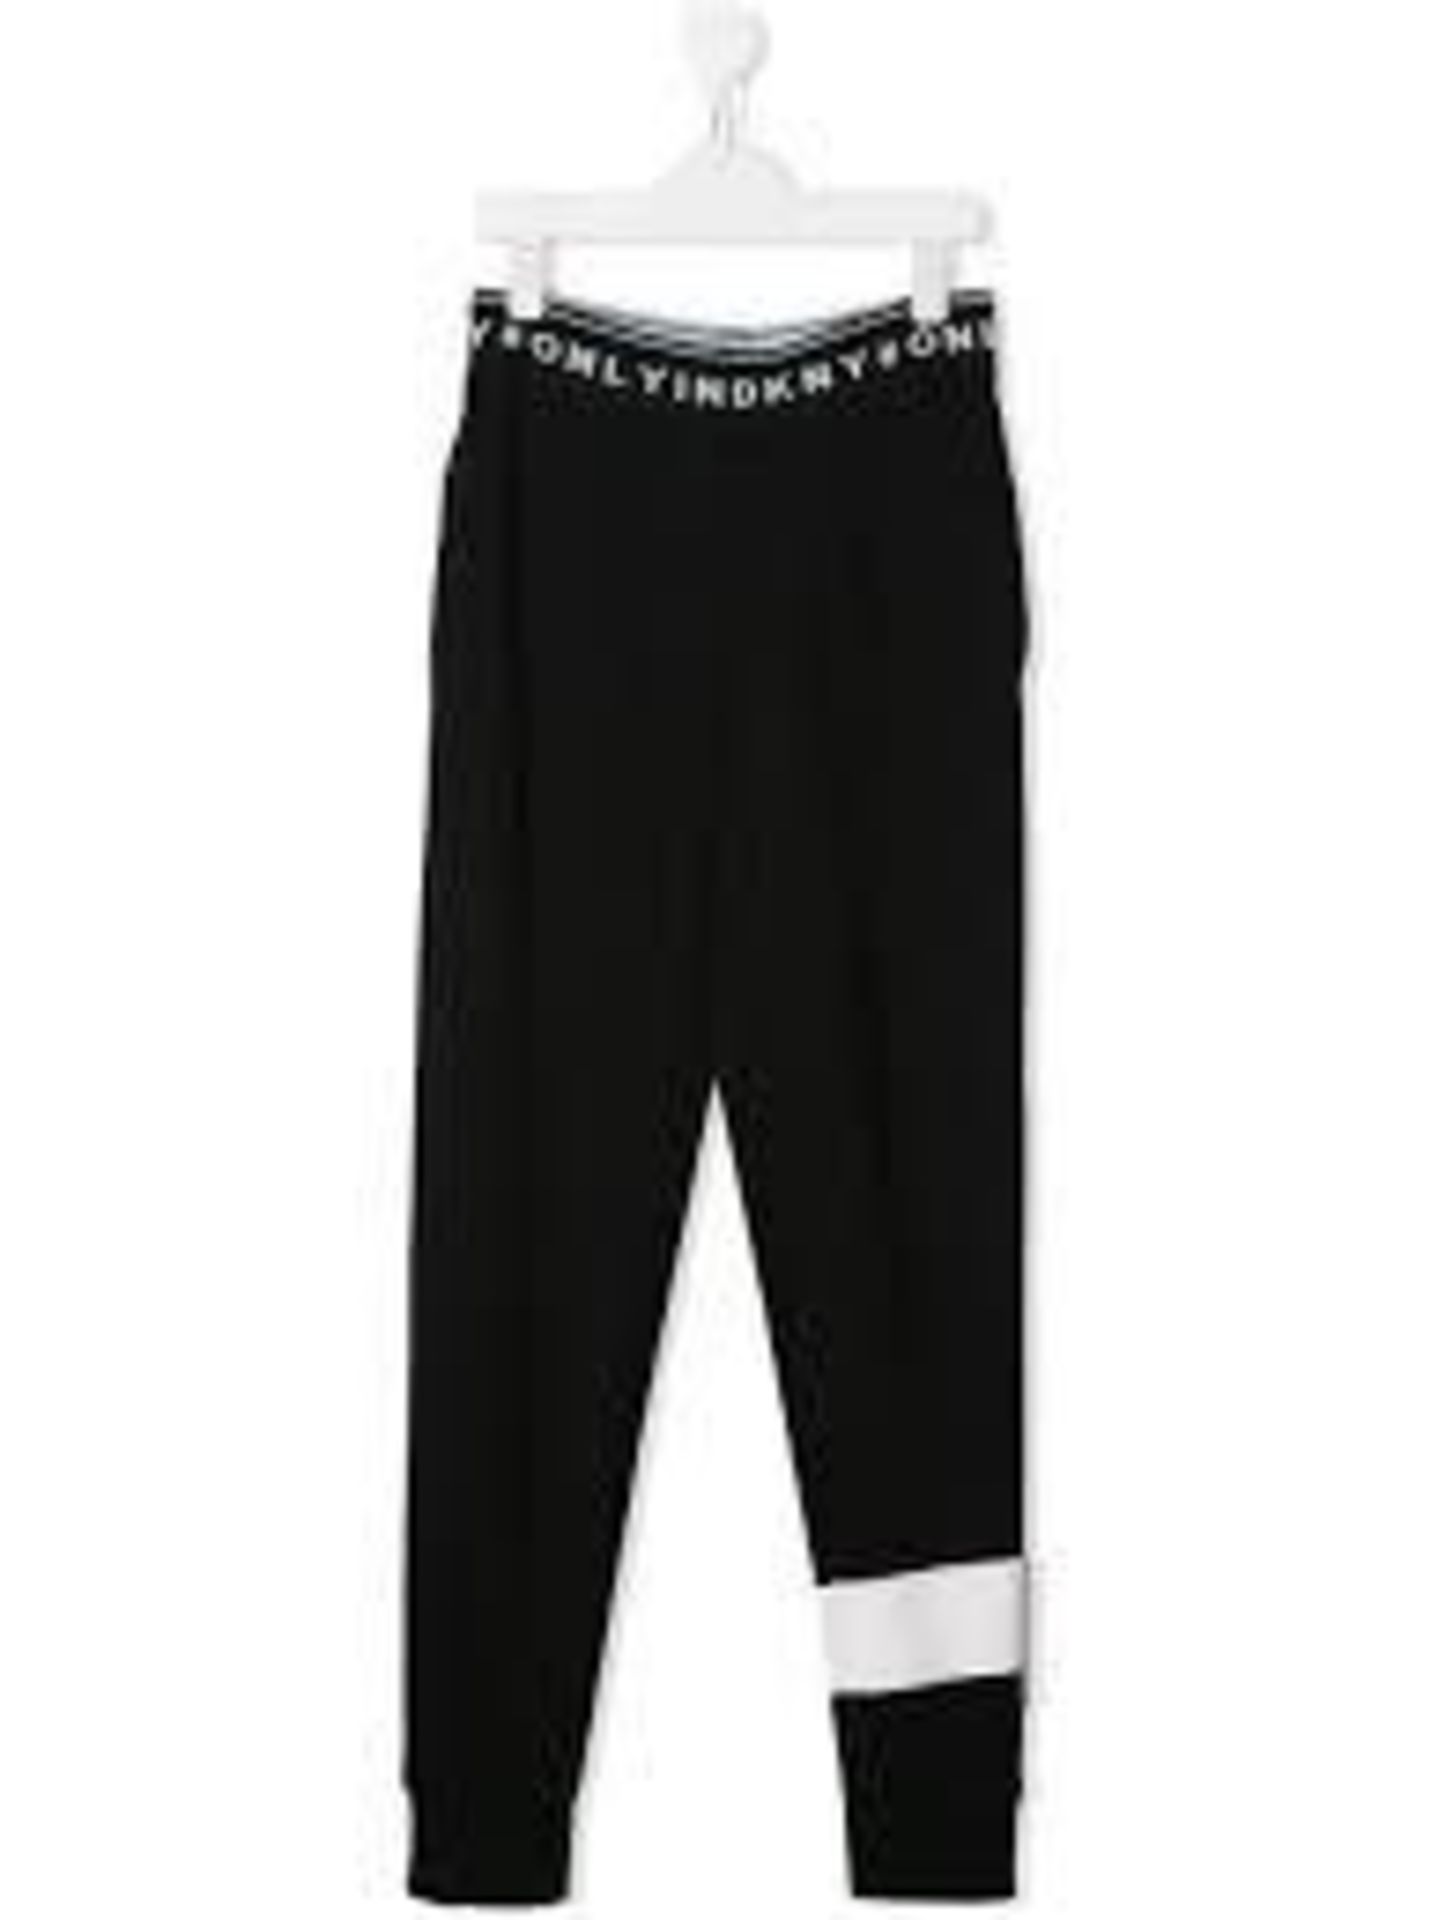 1 x DKNY Joggers - New With Tags - Size: 8A - Ref: D24683 - CL580 - NO VAT ON THE HAMMER - Location: